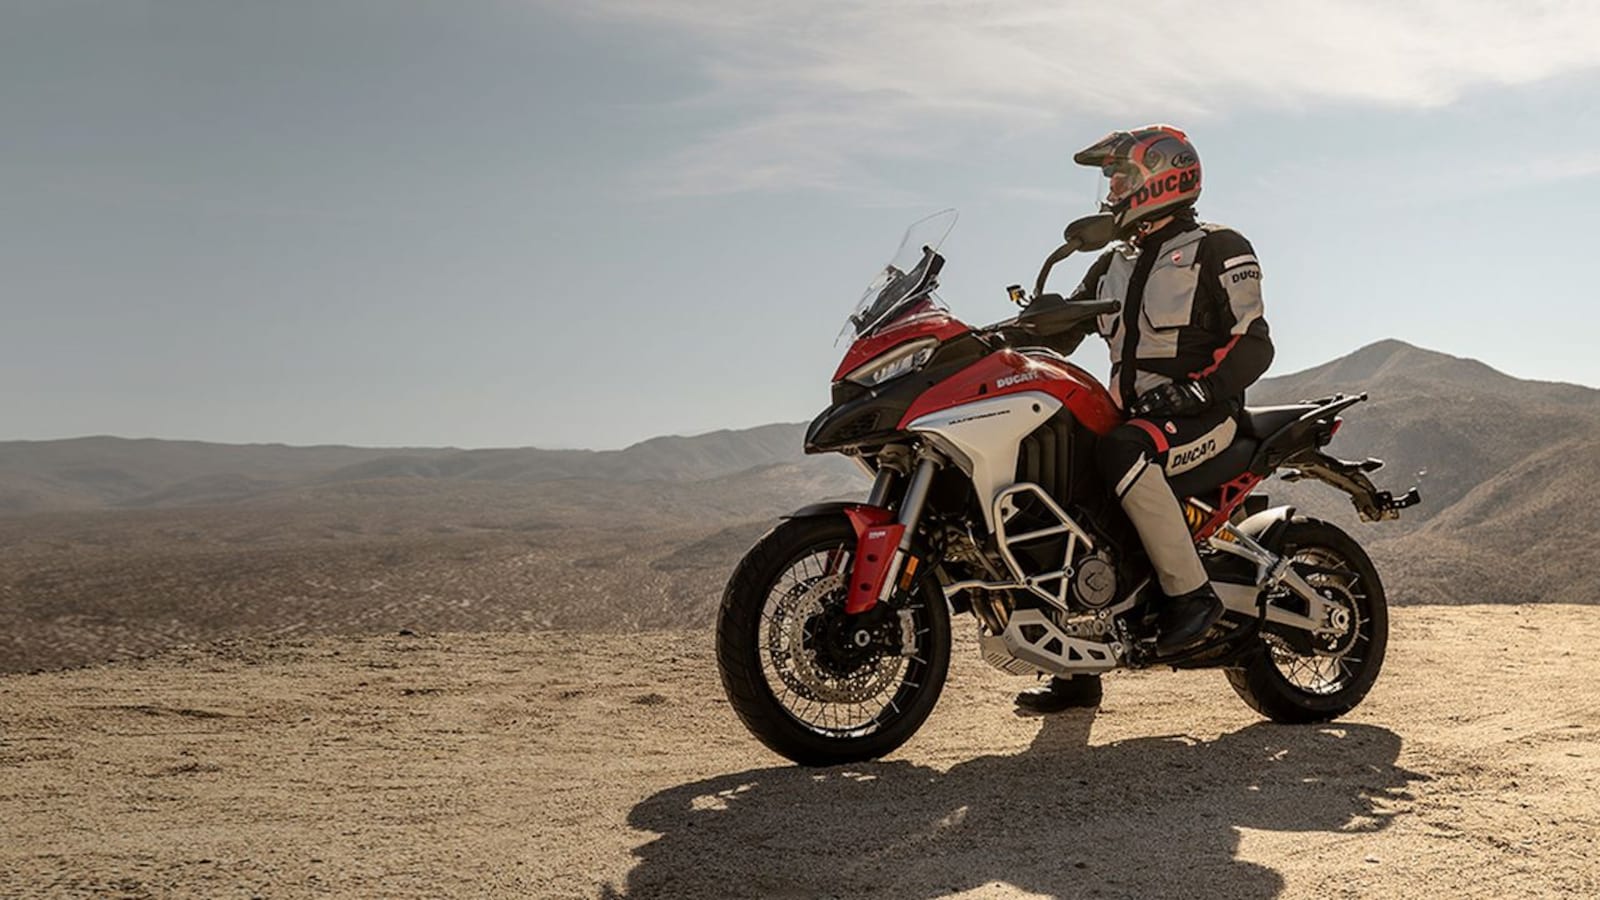 Ducati Multistrada V4 S review: The Swiss Army knife of motorcycles